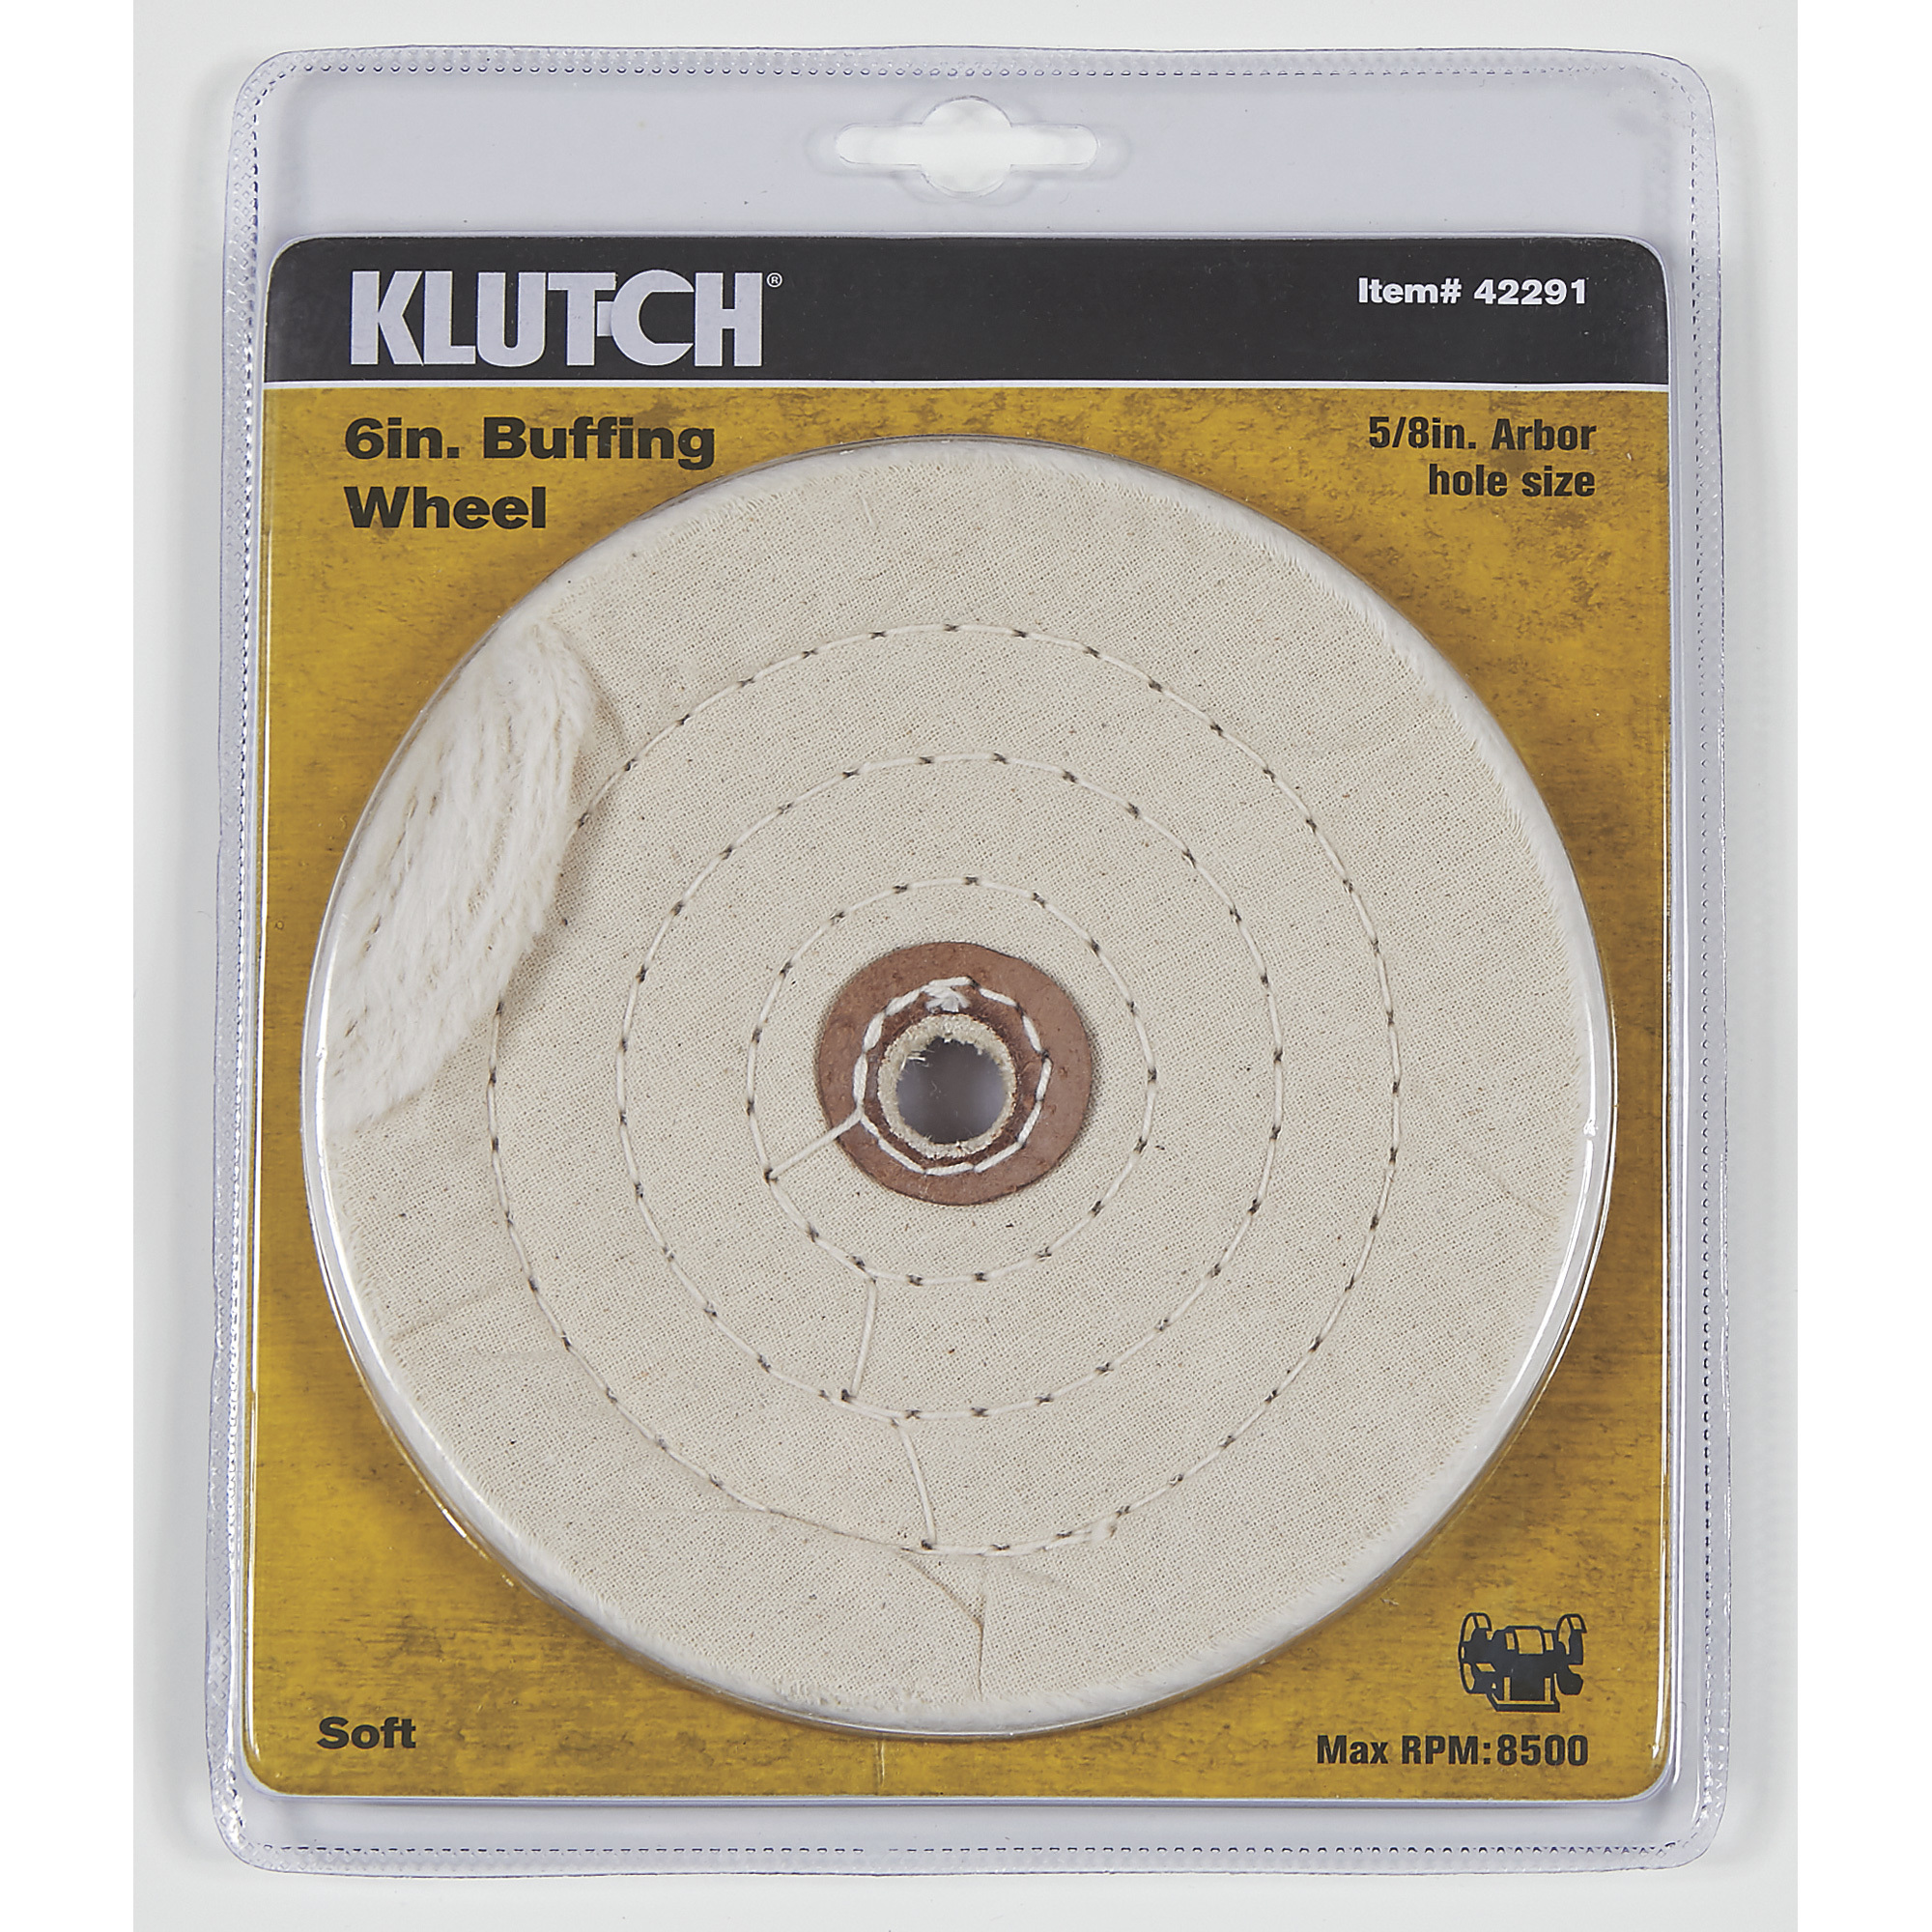 POWERTEC 6 in. Bench Grinder Buffing Wheel Kit with 3-piecs Polishing  Compound Set 71631 - The Home Depot